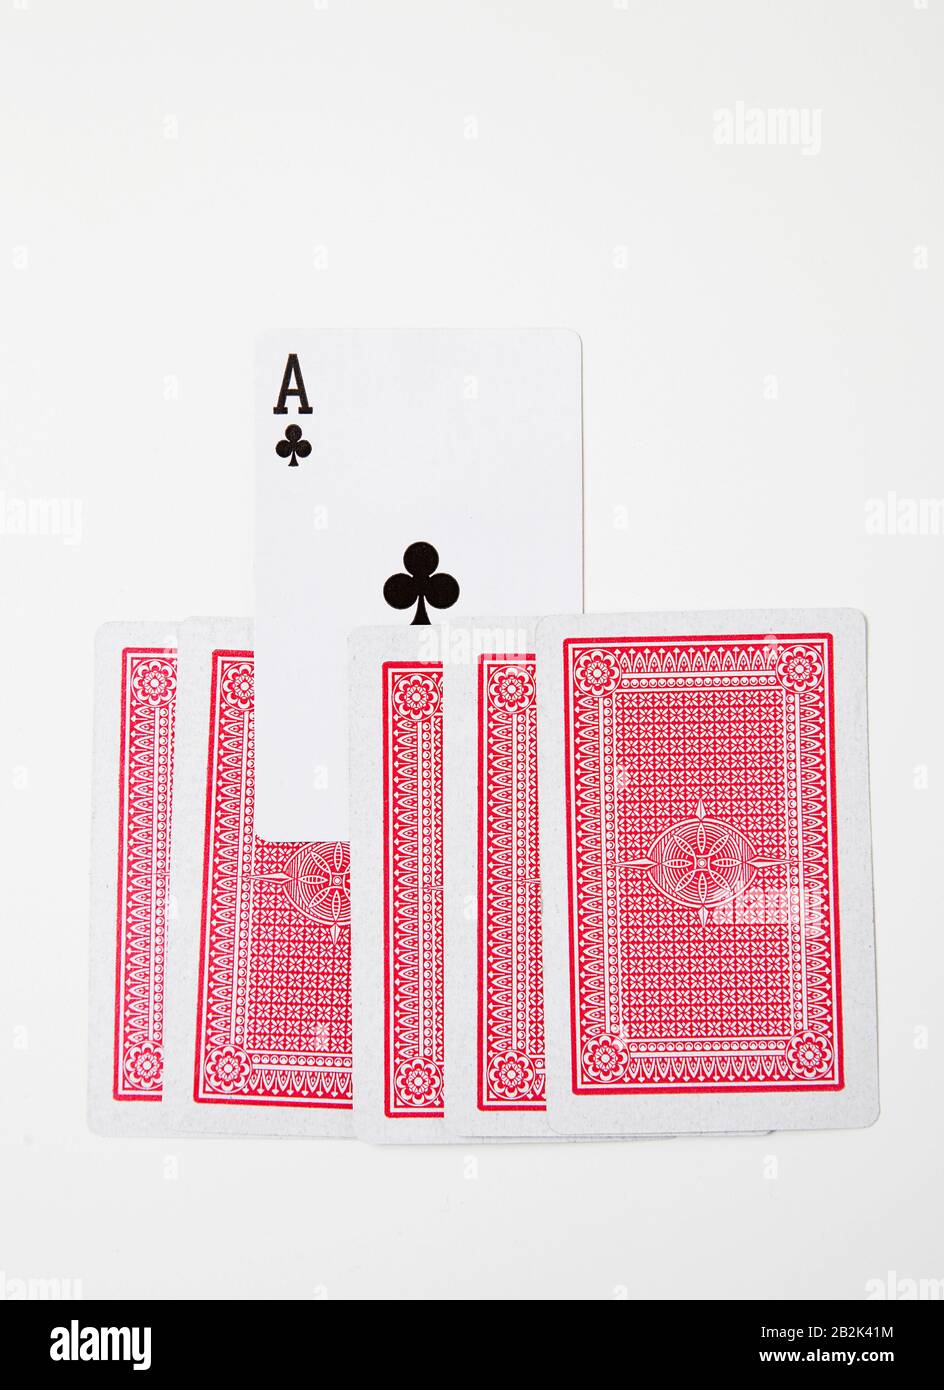 Ace of clubs standing out from other red cards Stock Photo